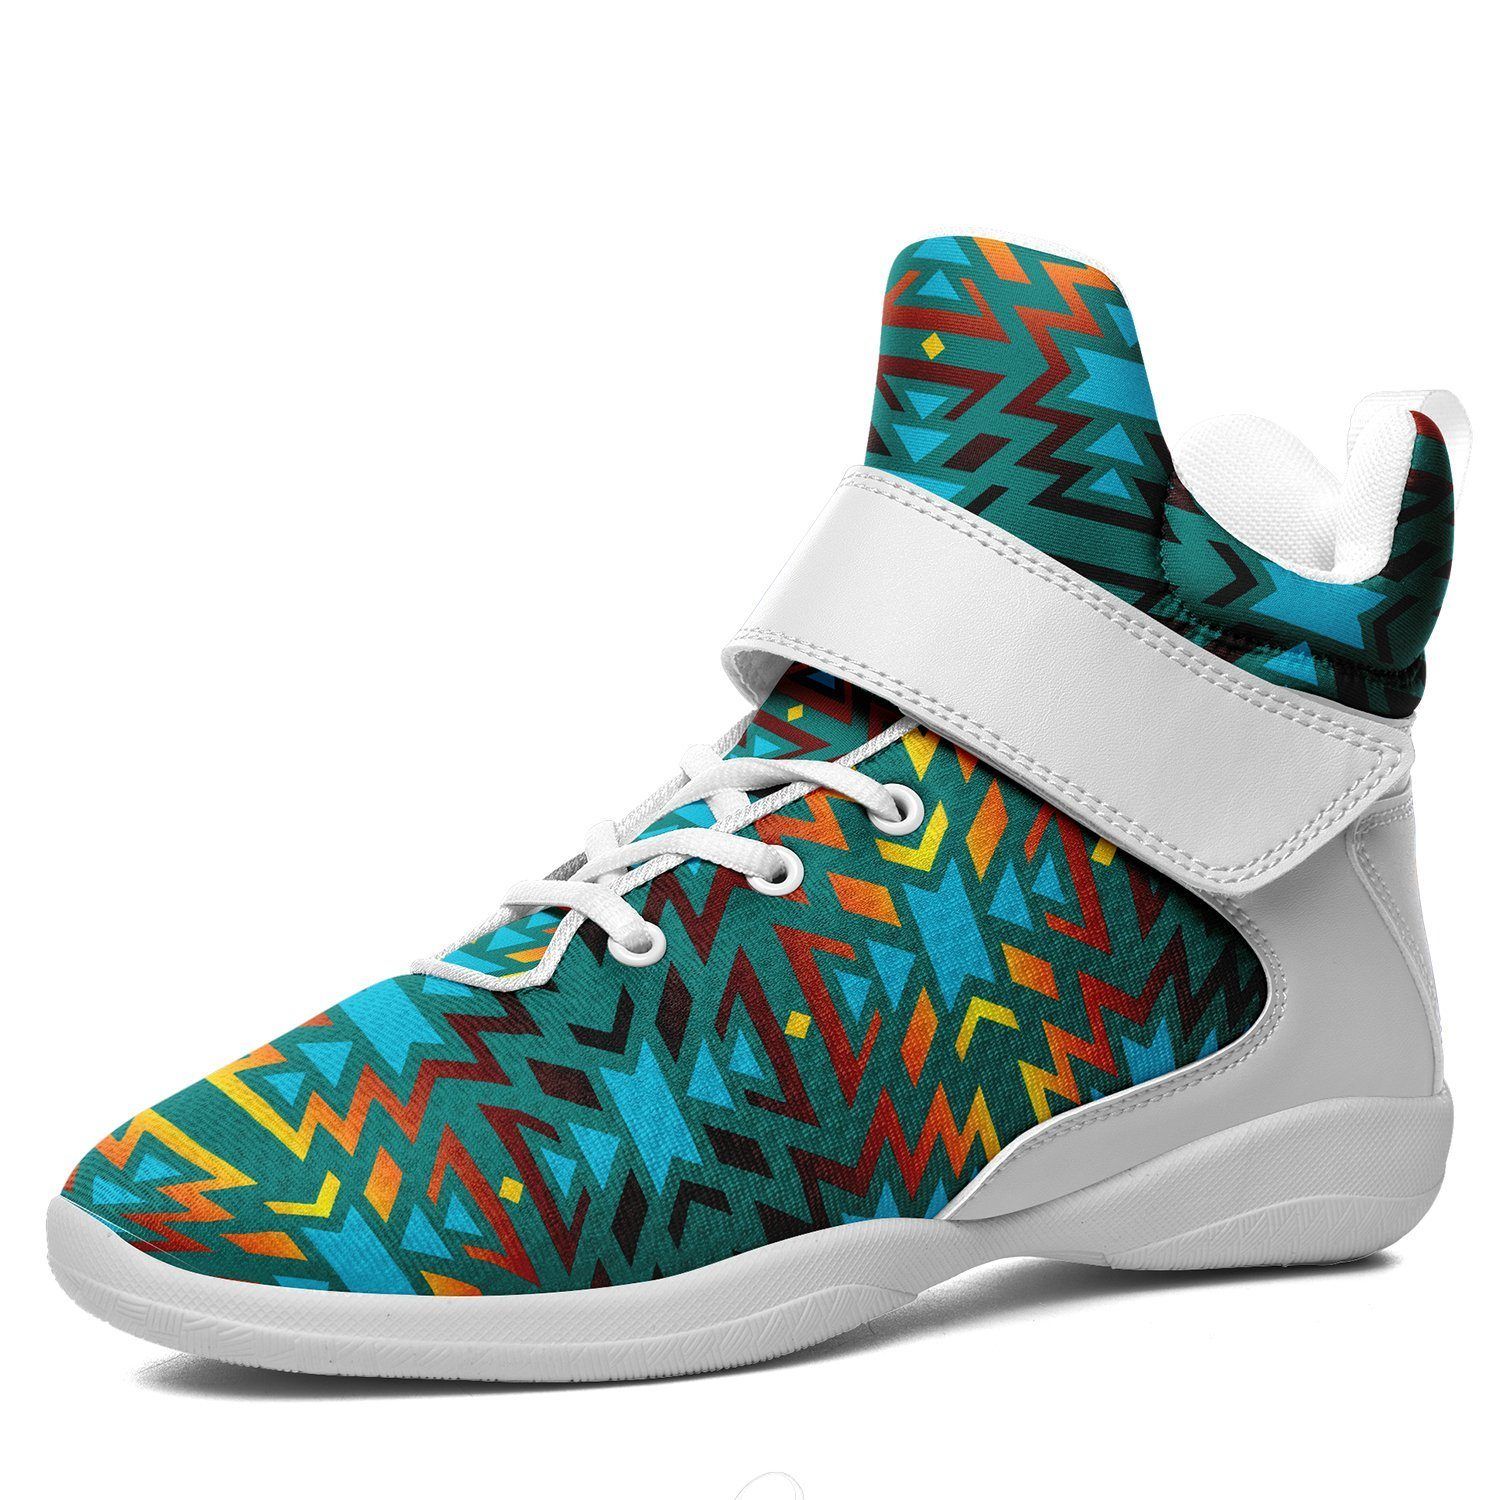 Fire Colors and Turquoise Teal Kid's Ipottaa Basketball / Sport High Top Shoes 49 Dzine US Child 12.5 / EUR 30 White Sole with White Strap 